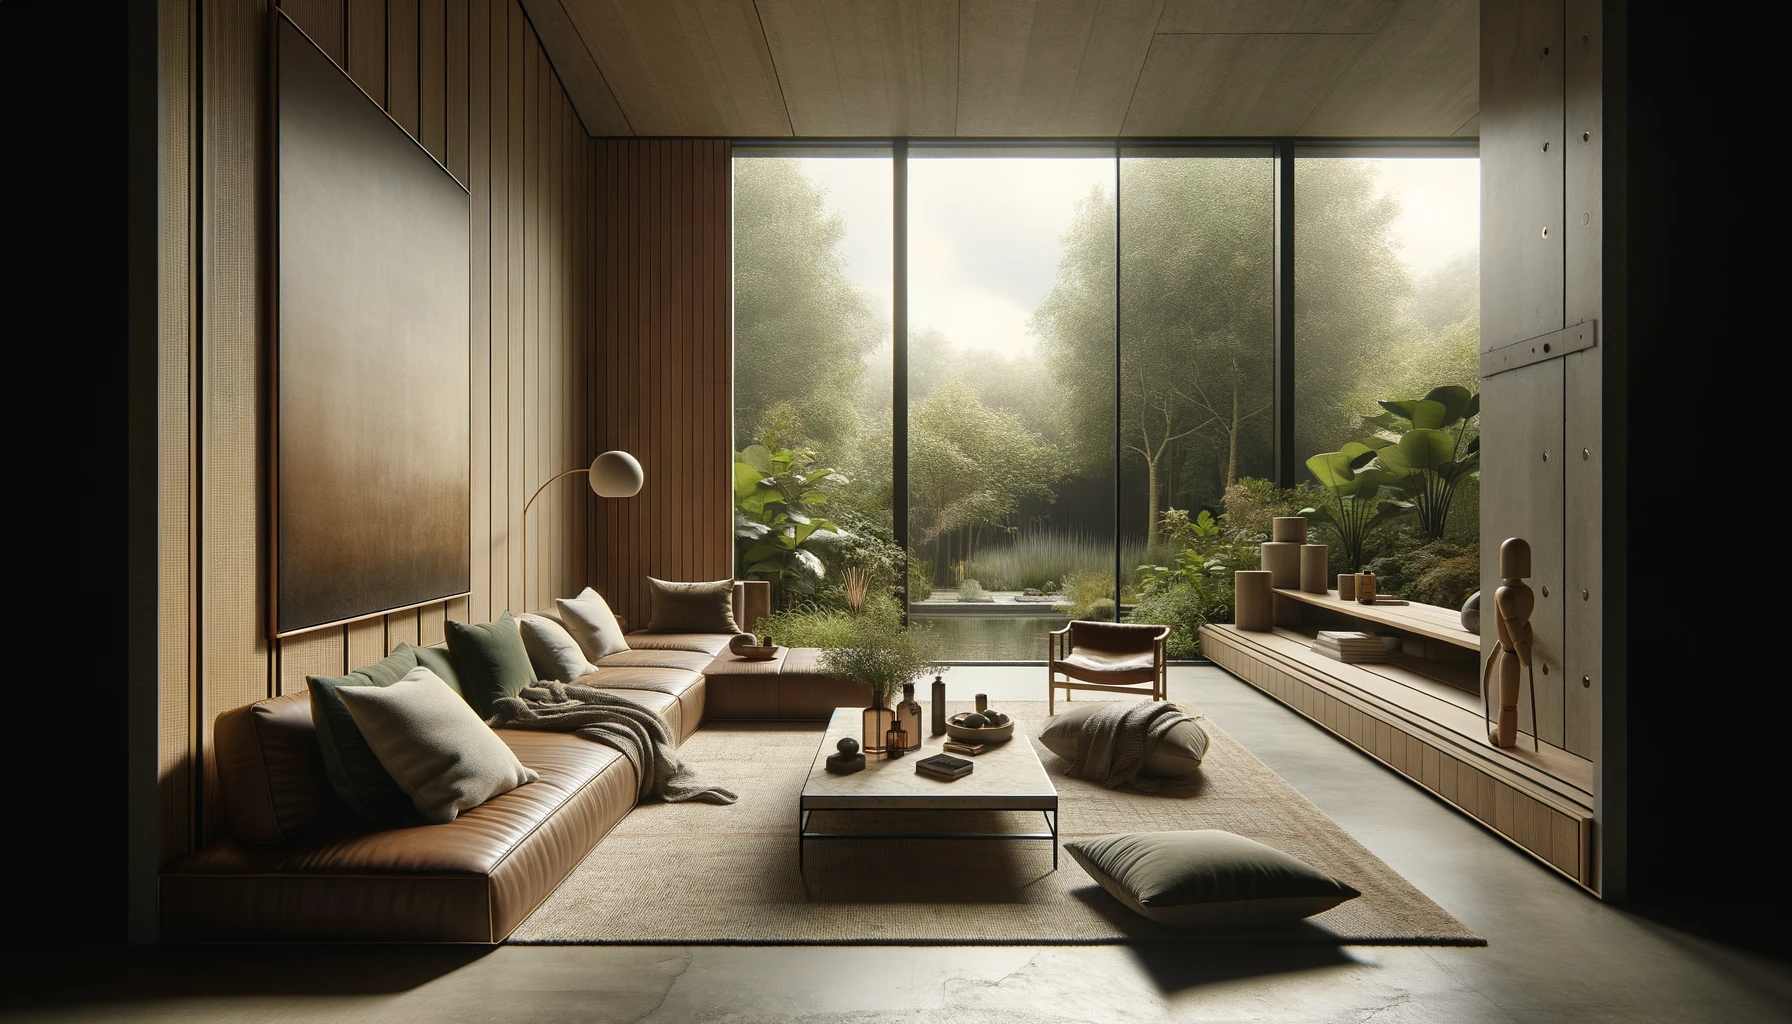 Modern lounge room with nature view through large window.